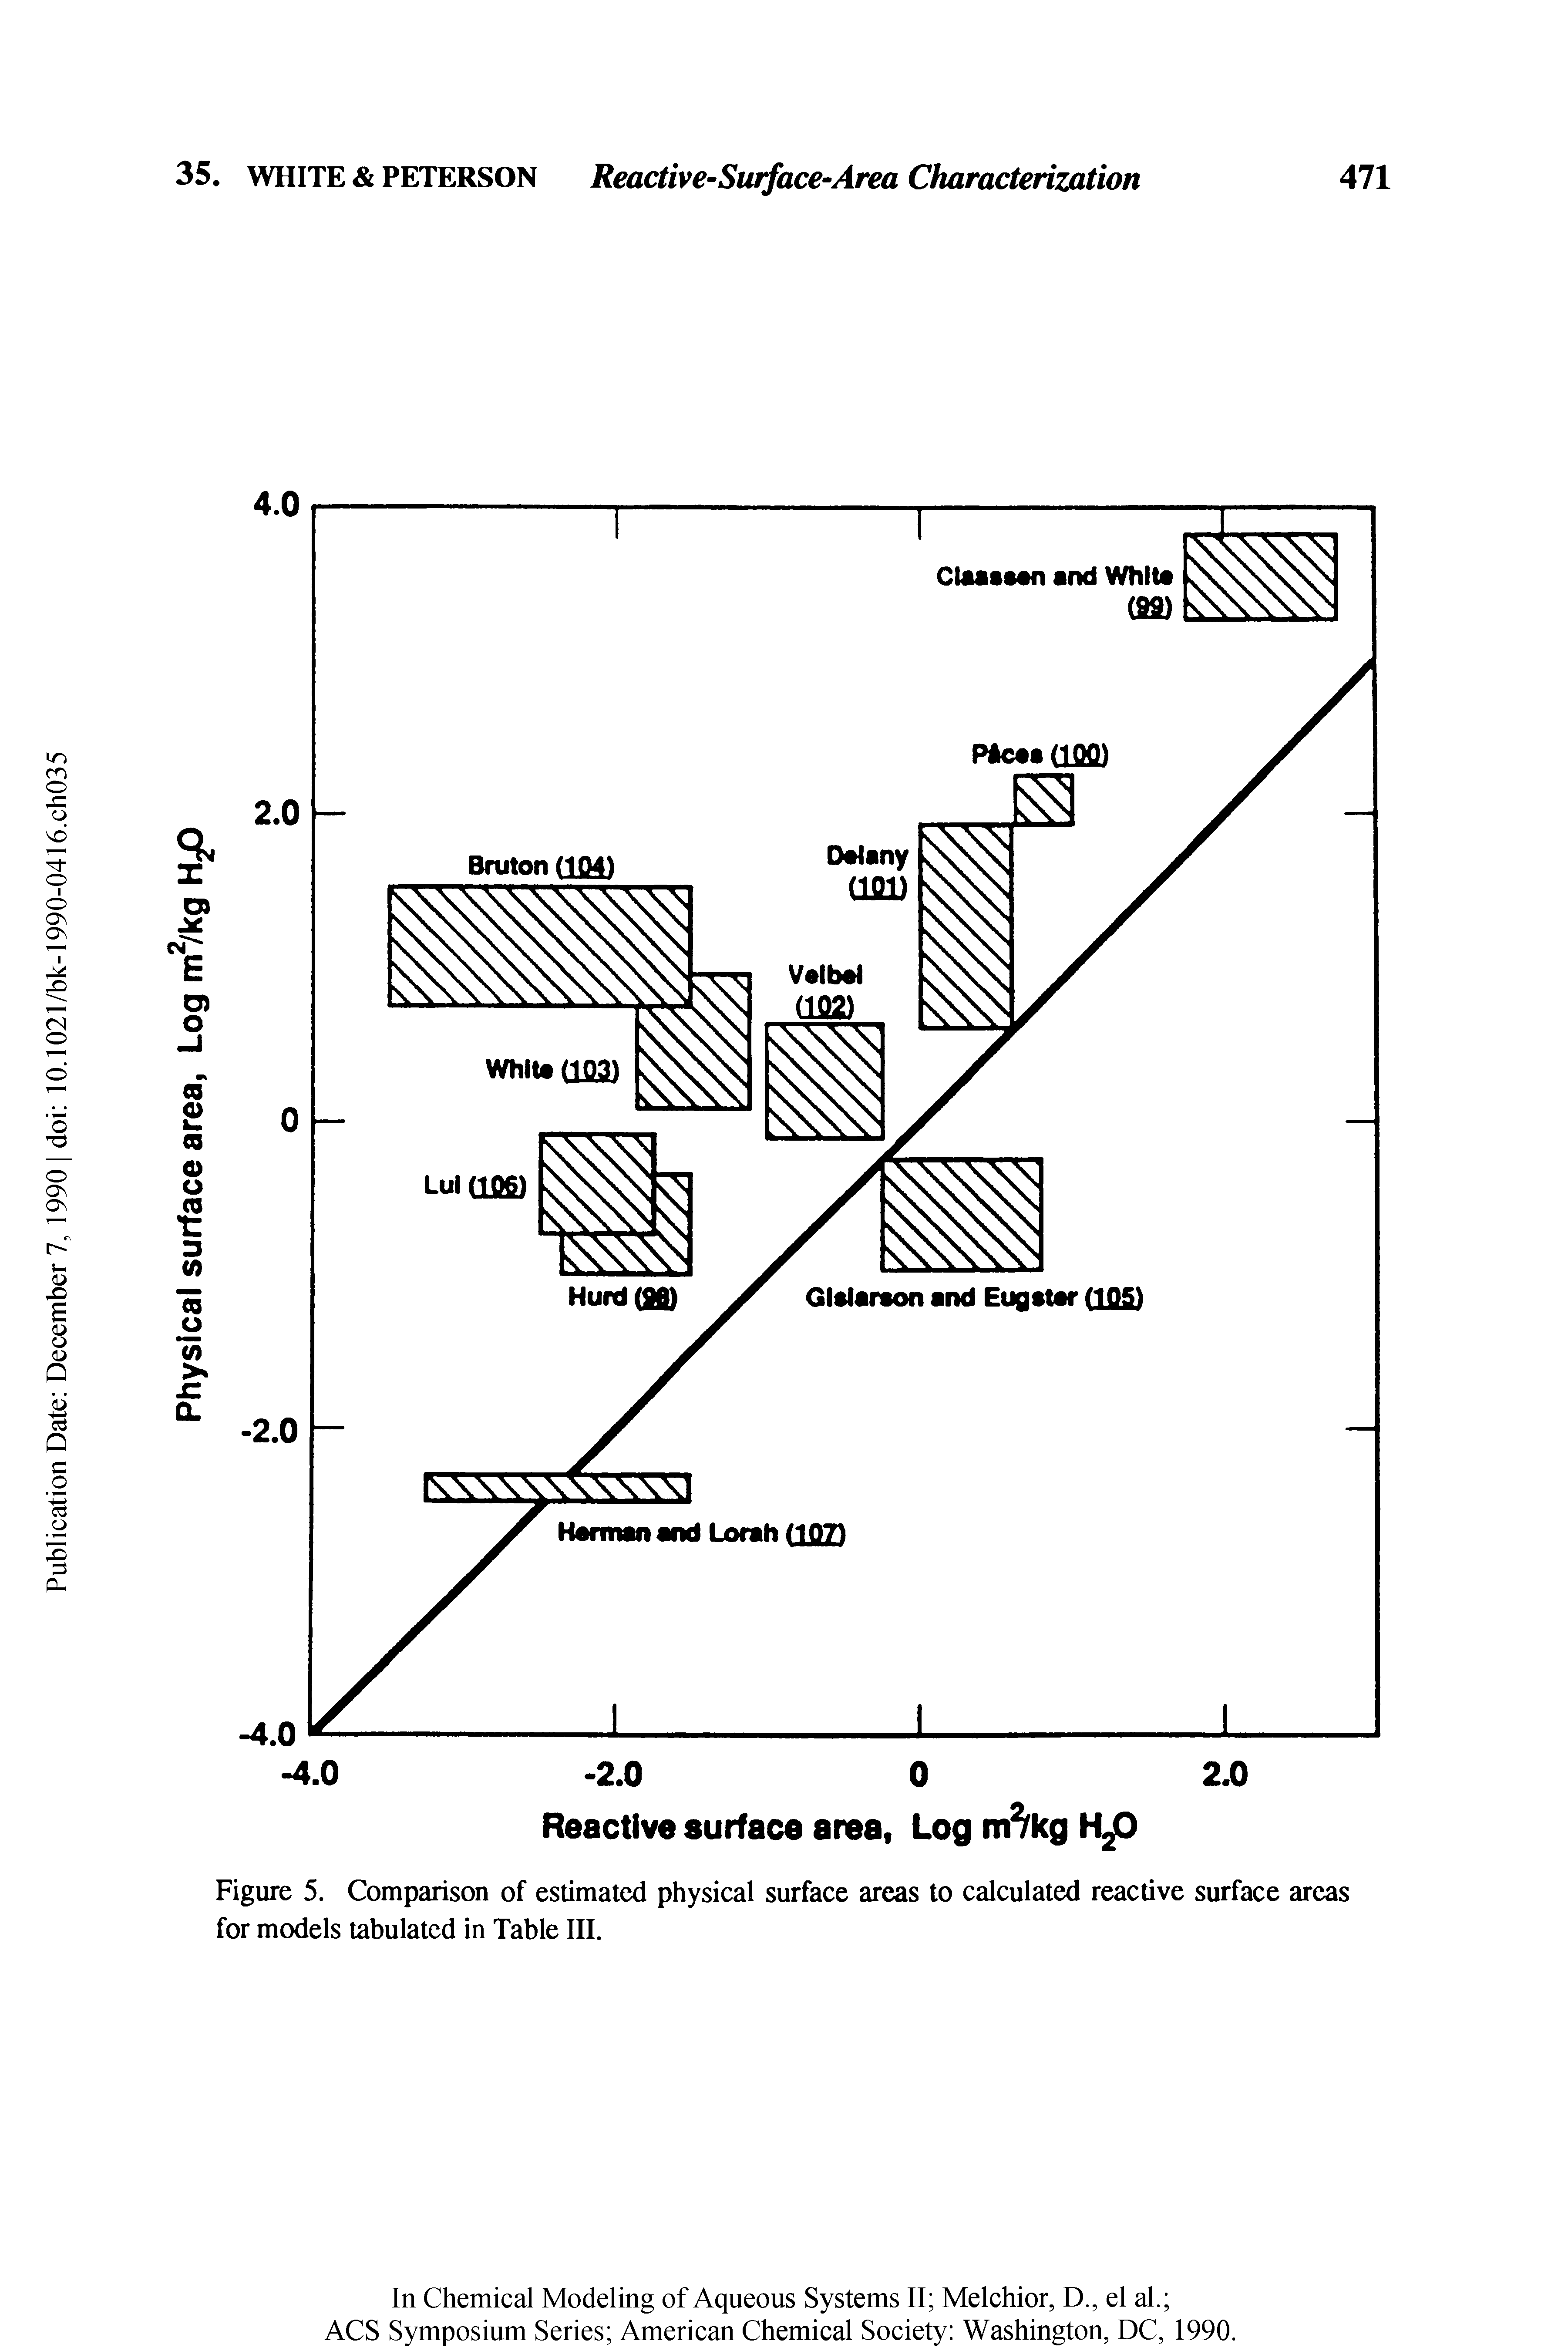 Figure 5. Comparison of estimated physical surface areas to calculated reactive surface areas for models tabulated in Table III.